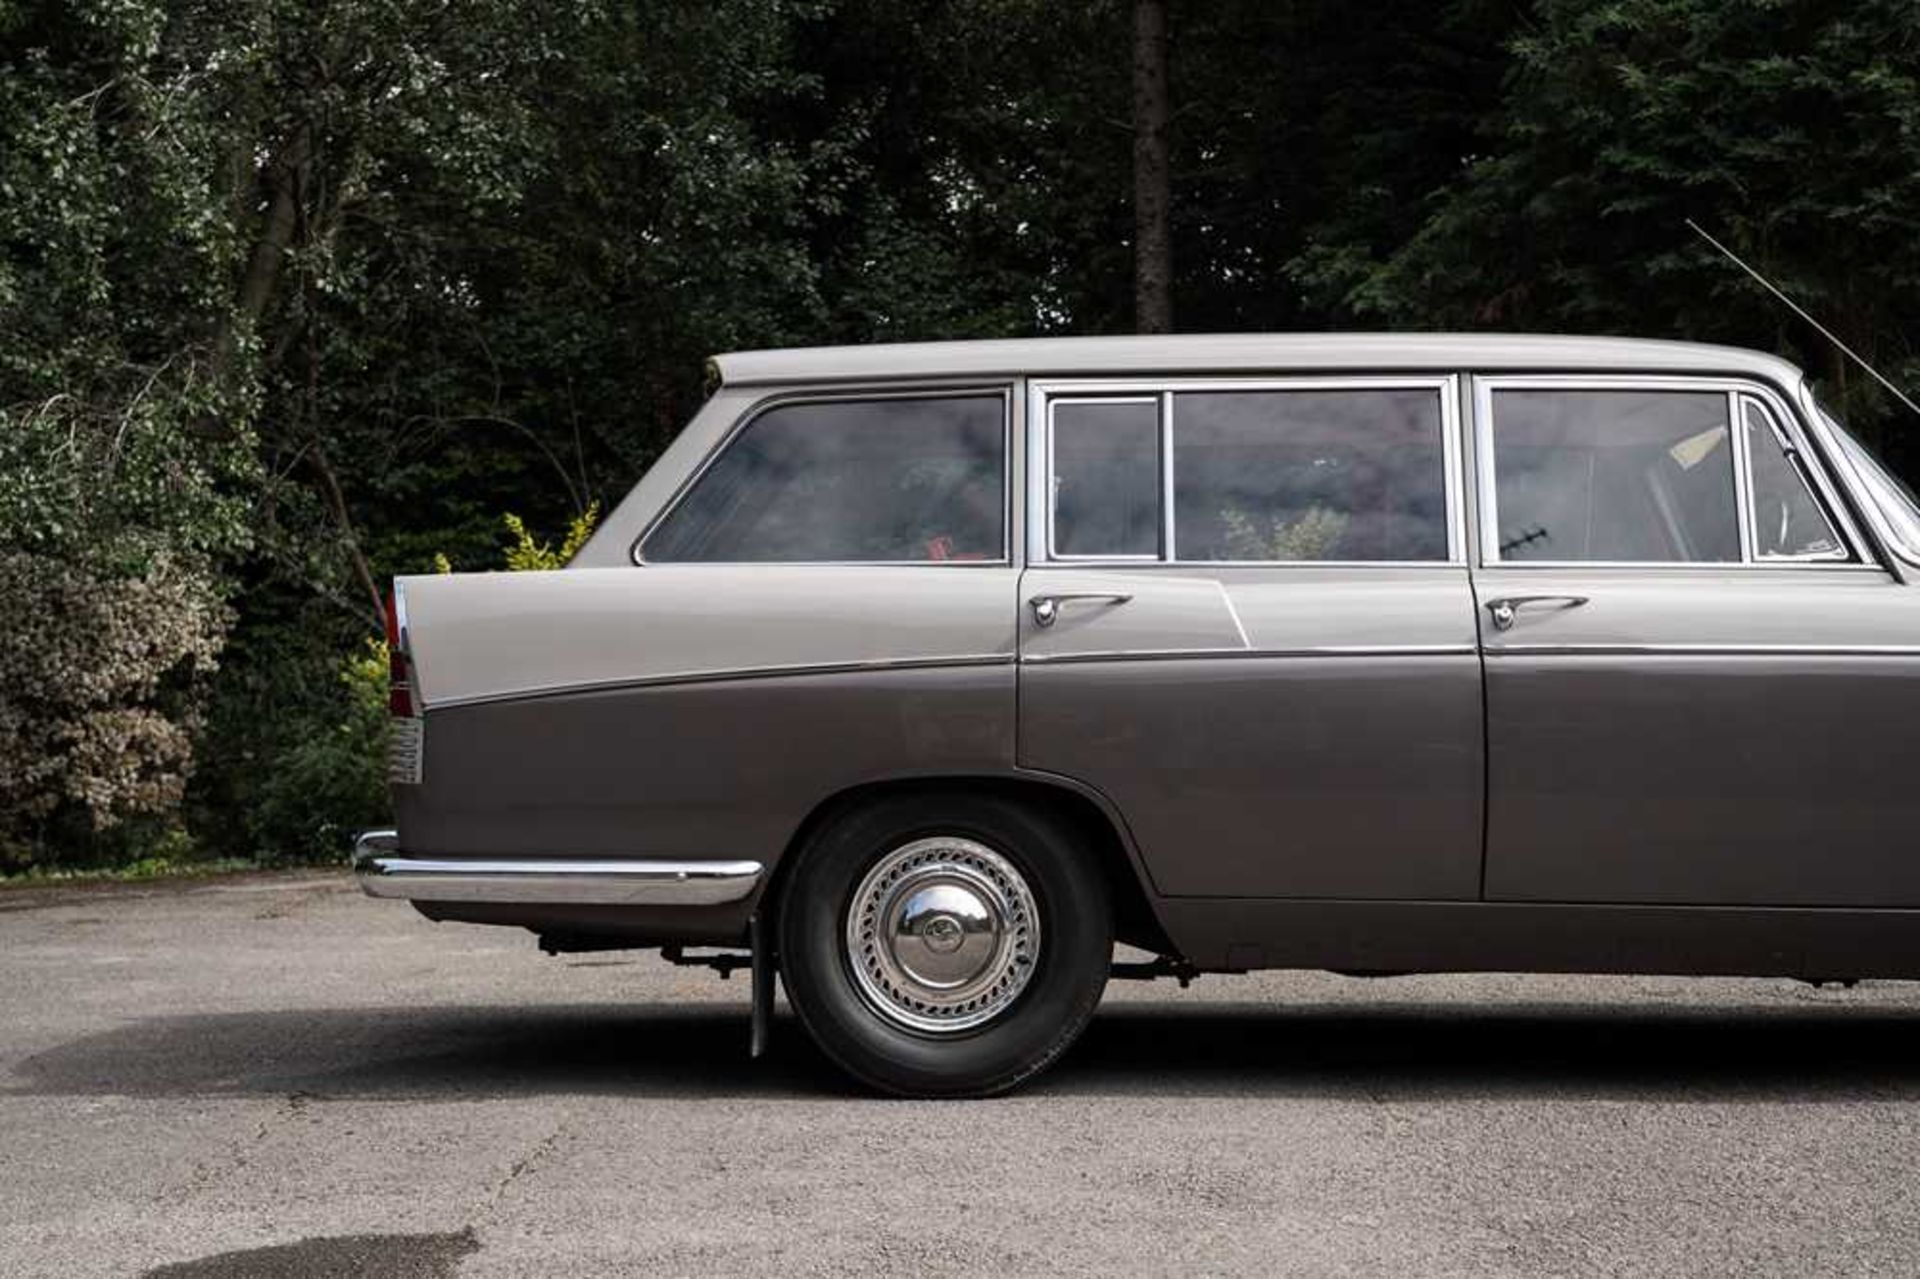 1964 Morris Oxford Series VI Farina Traveller Just 7,000 miles from new - Image 31 of 98